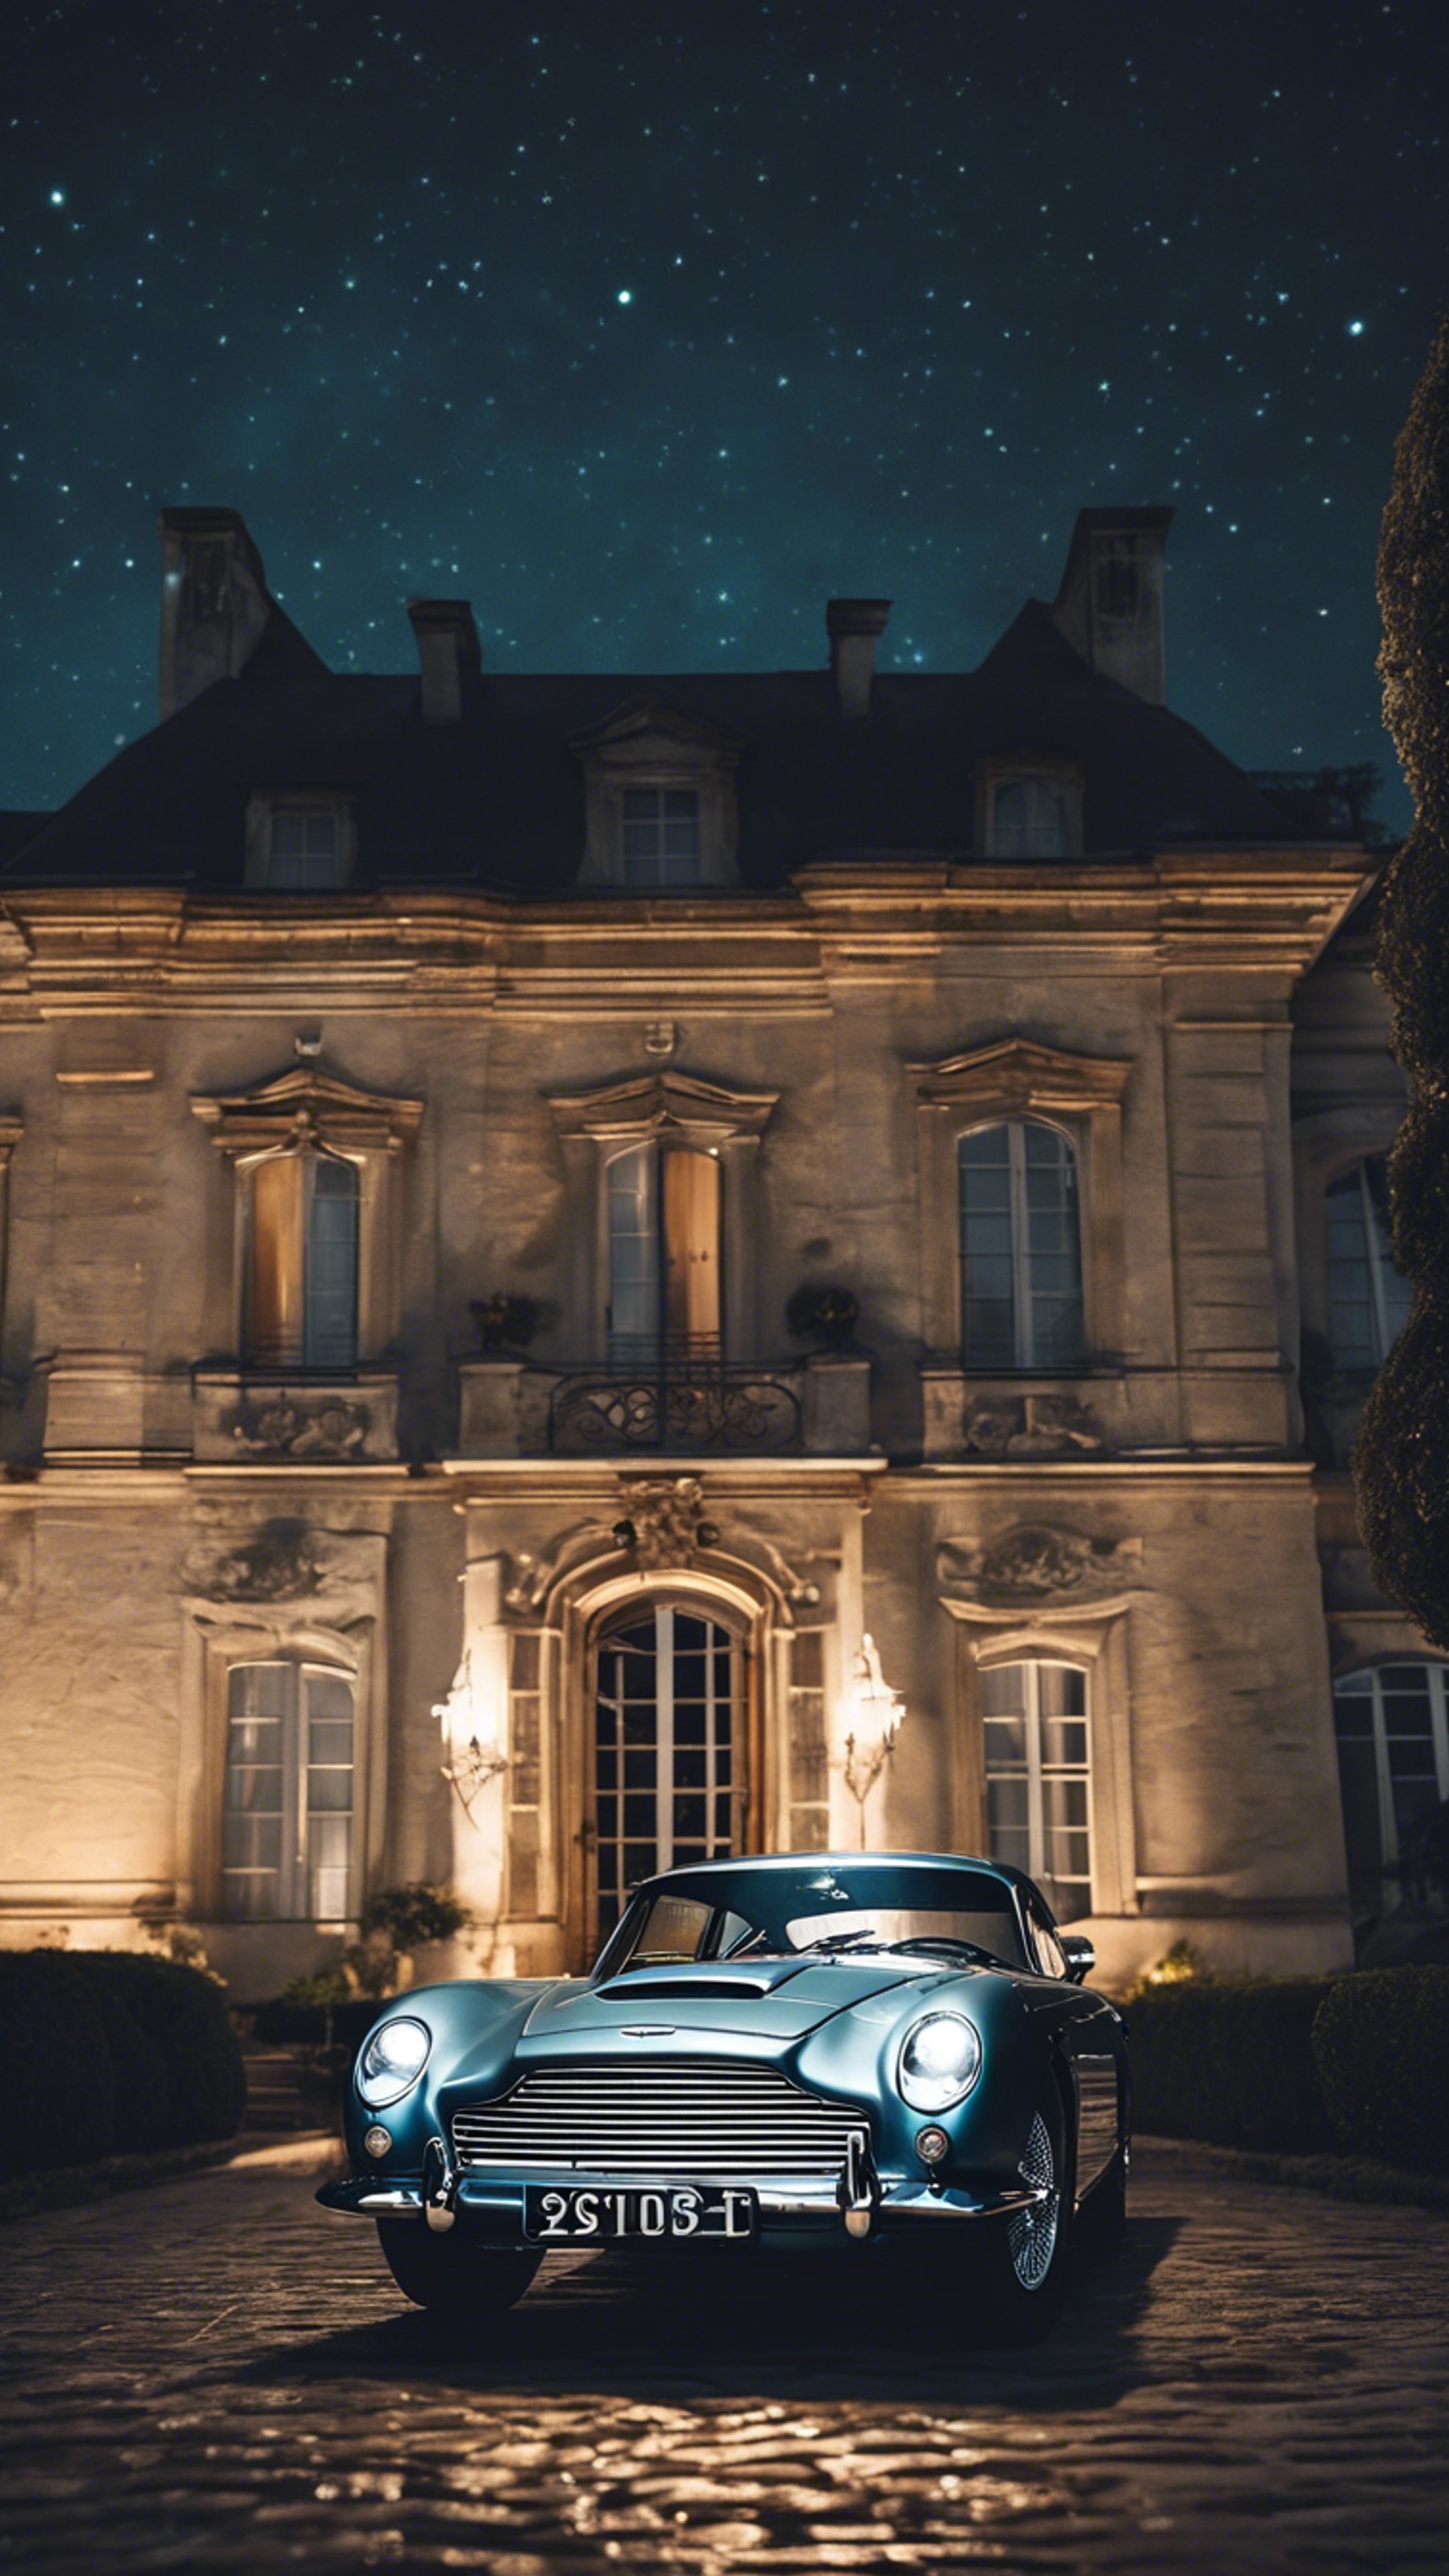 An Aston Martin DB5 under the night sky, parked in front of a luxurious French chateau. Валлпапер[481d4699df504b519845]